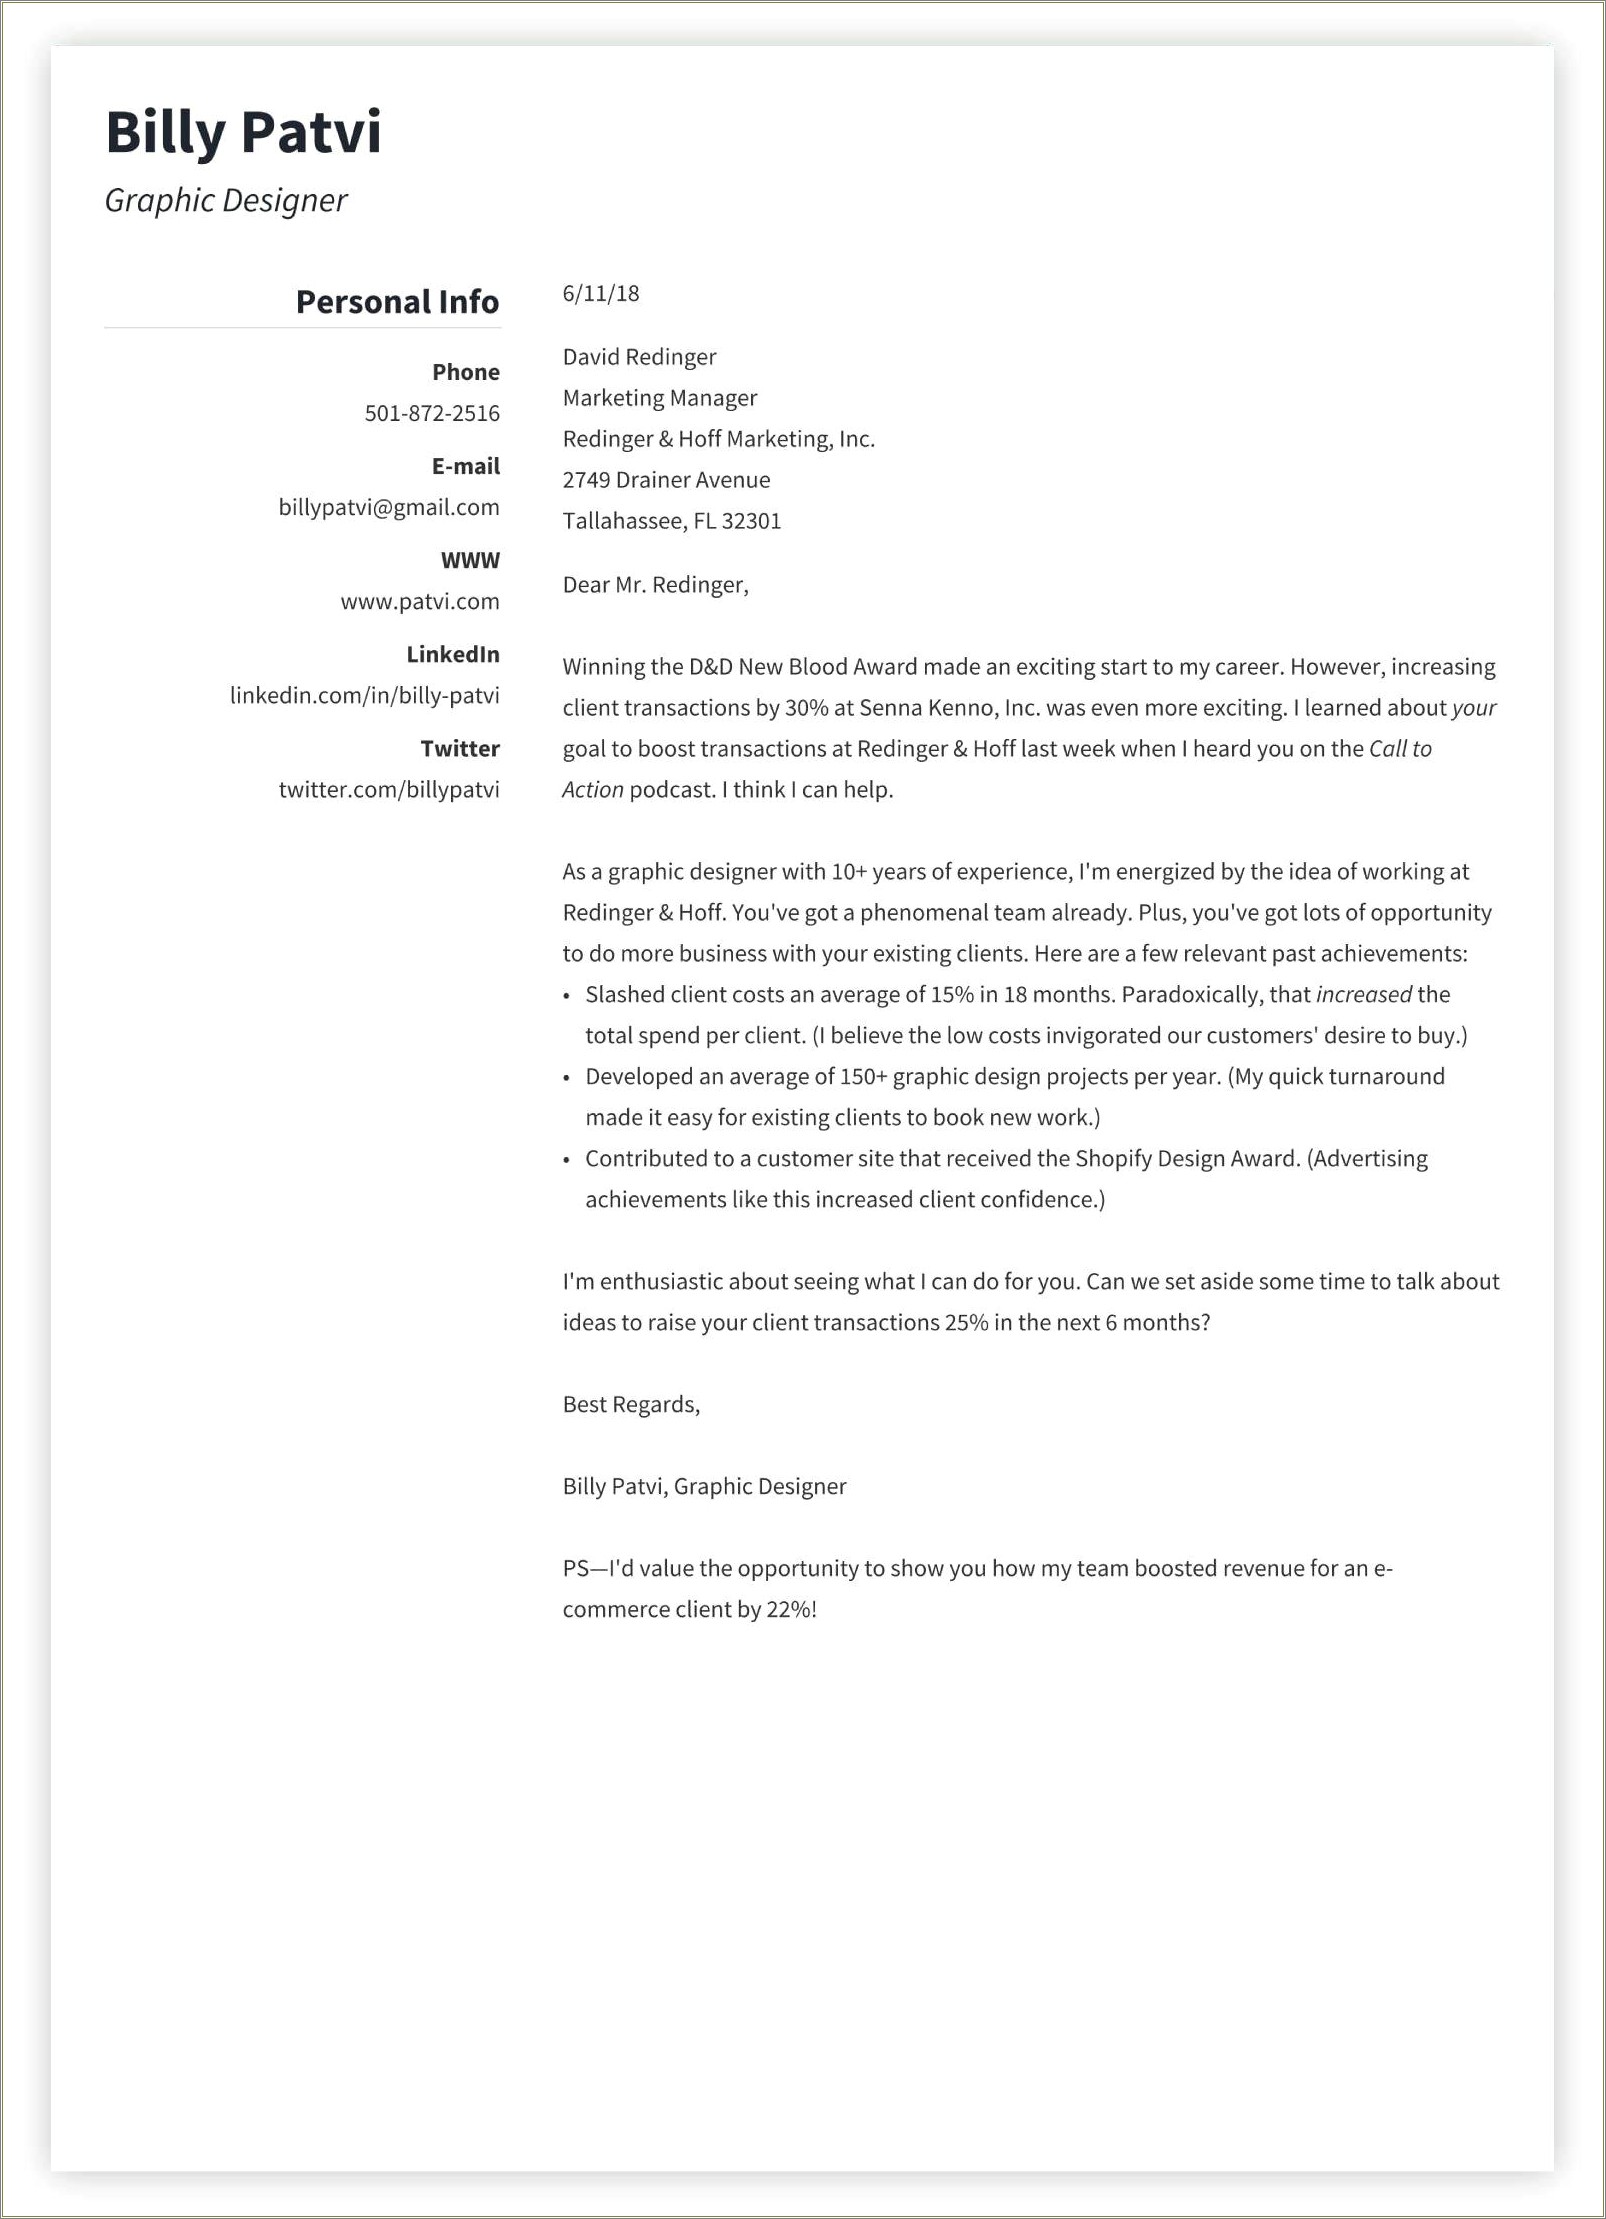 Always Send Cover Letter With Resume